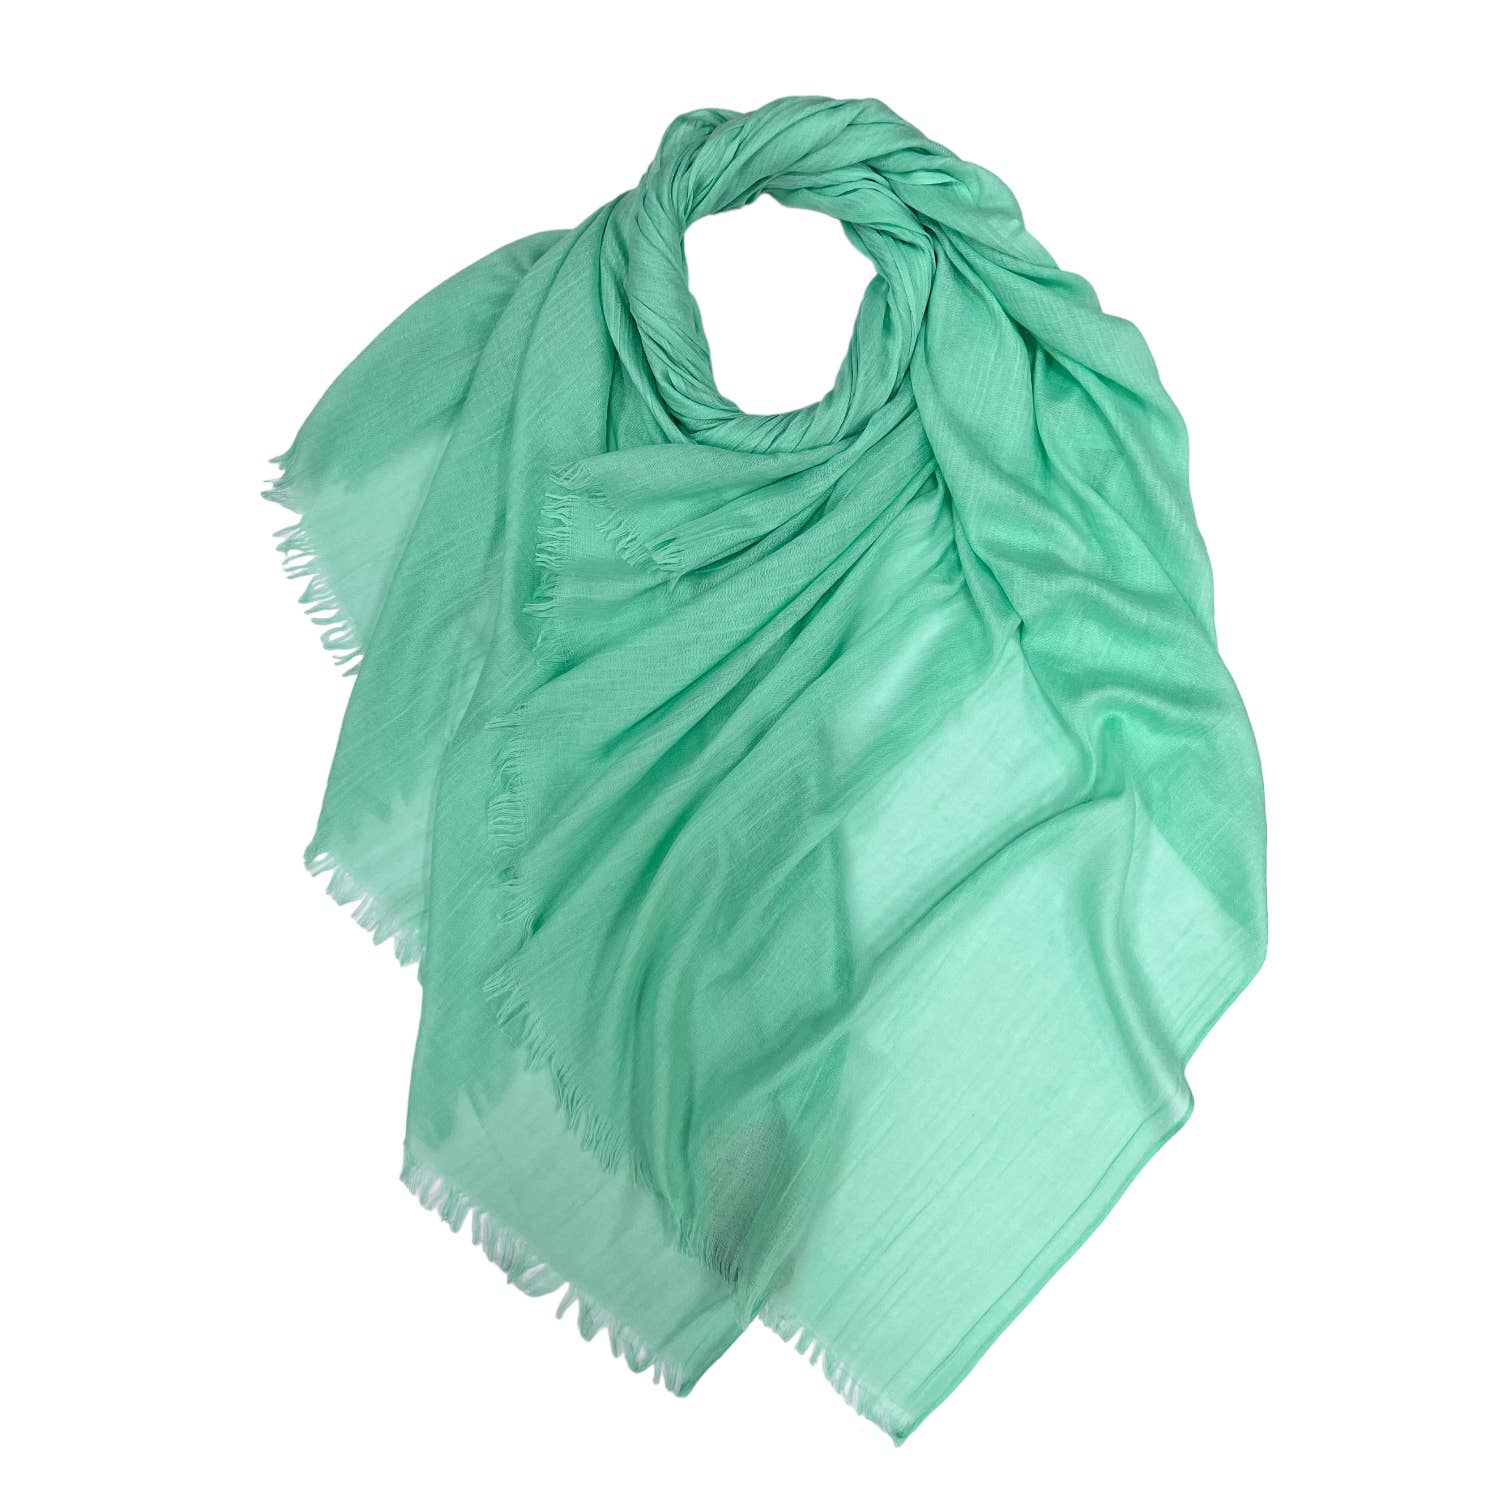 Classic plain cotton blend scarf finished with fringes - The Nancy Smillie Shop - Art, Jewellery & Designer Gifts Glasgow